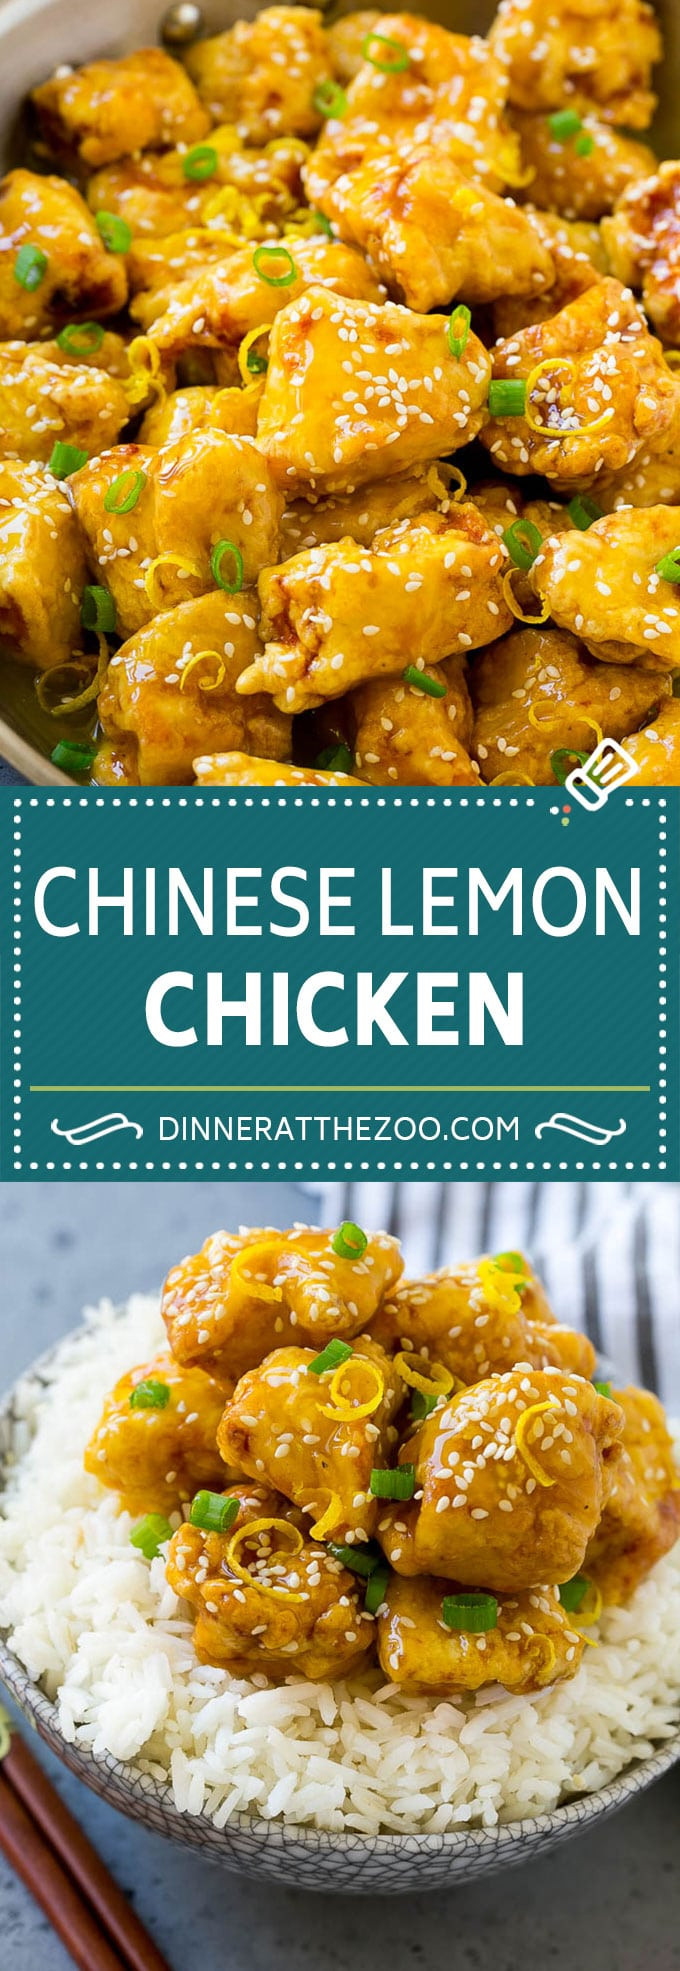 Lemon Chicken Recipes Chinese
 Chinese Lemon Chicken Dinner at the Zoo